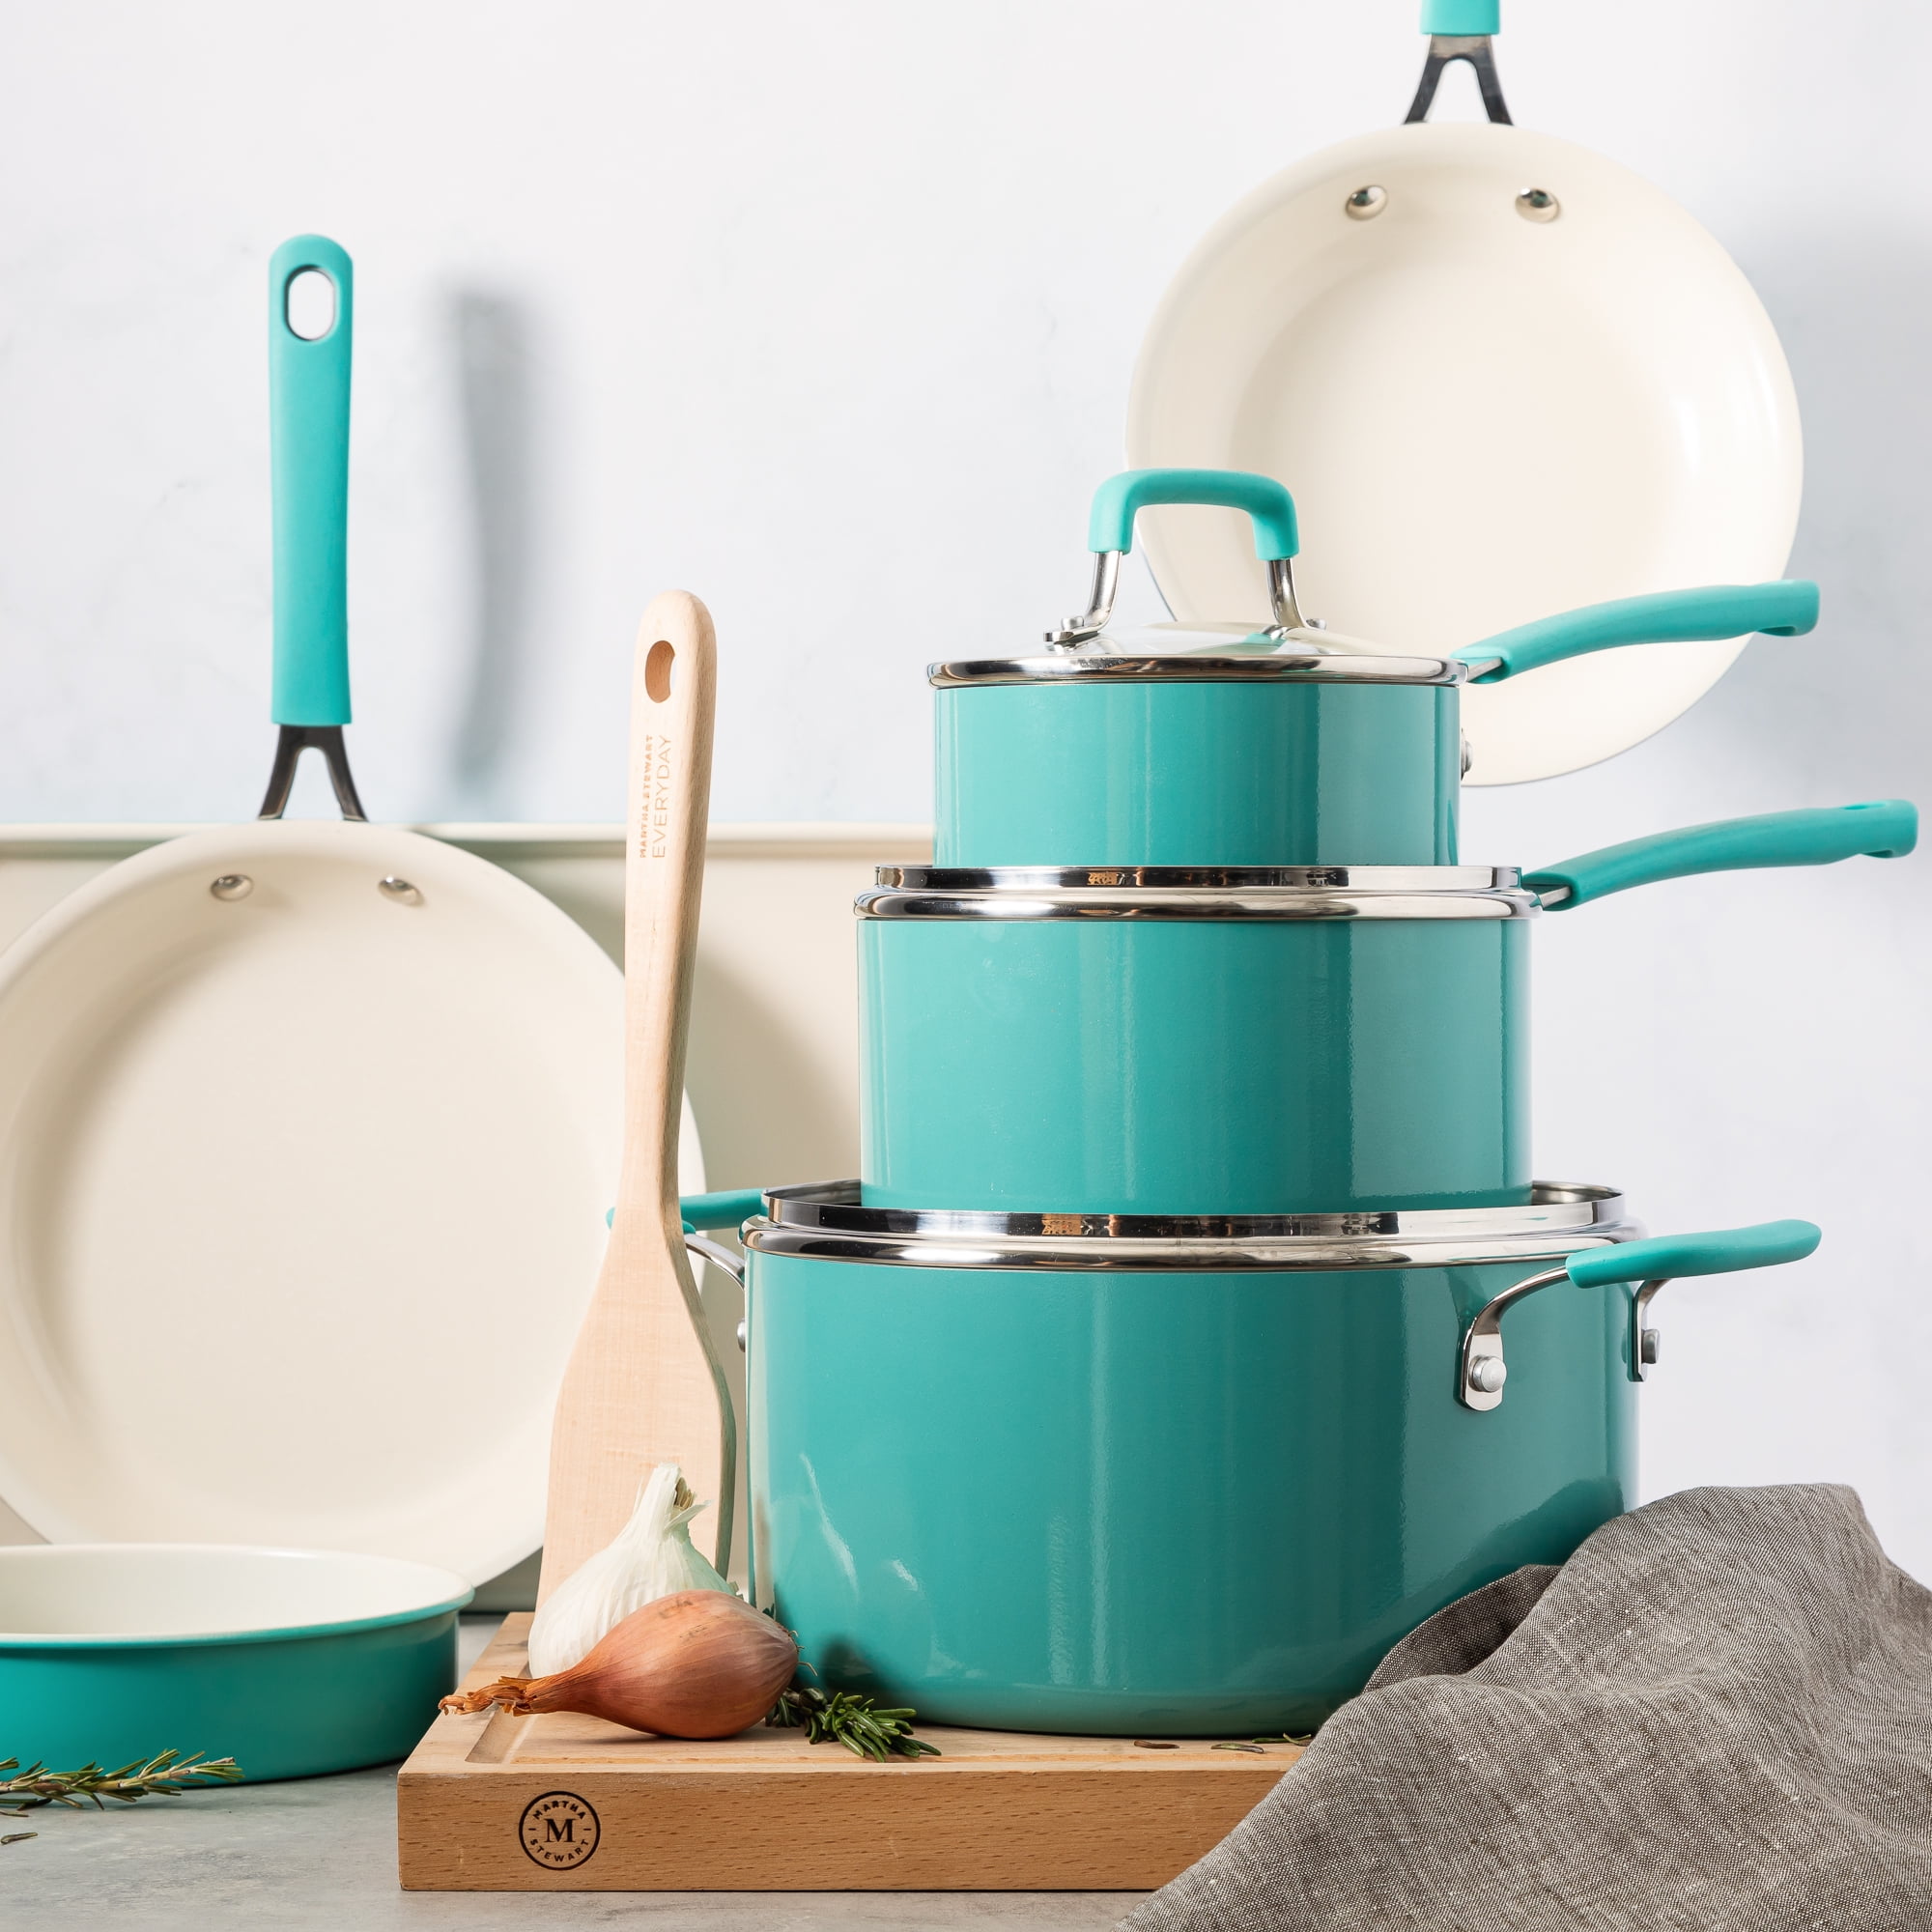 Wayfair Is Having an Unbelievable Sale on Cookware Sets Including Martha  Stewart, Green Pan & More – SheKnows